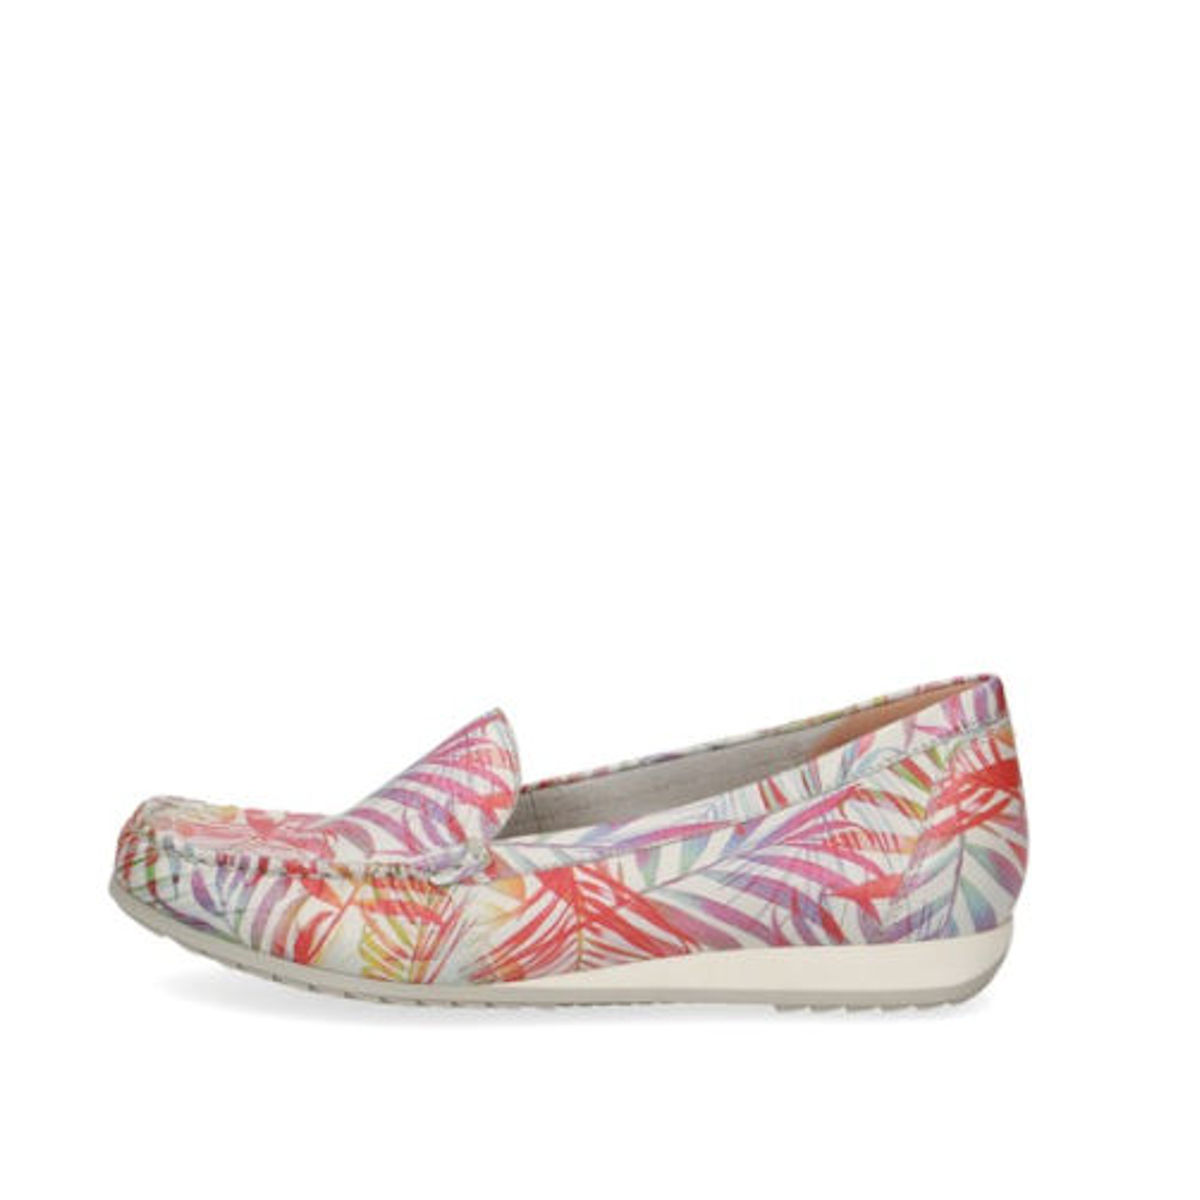 Caprice Palm Deer printed leather shoes